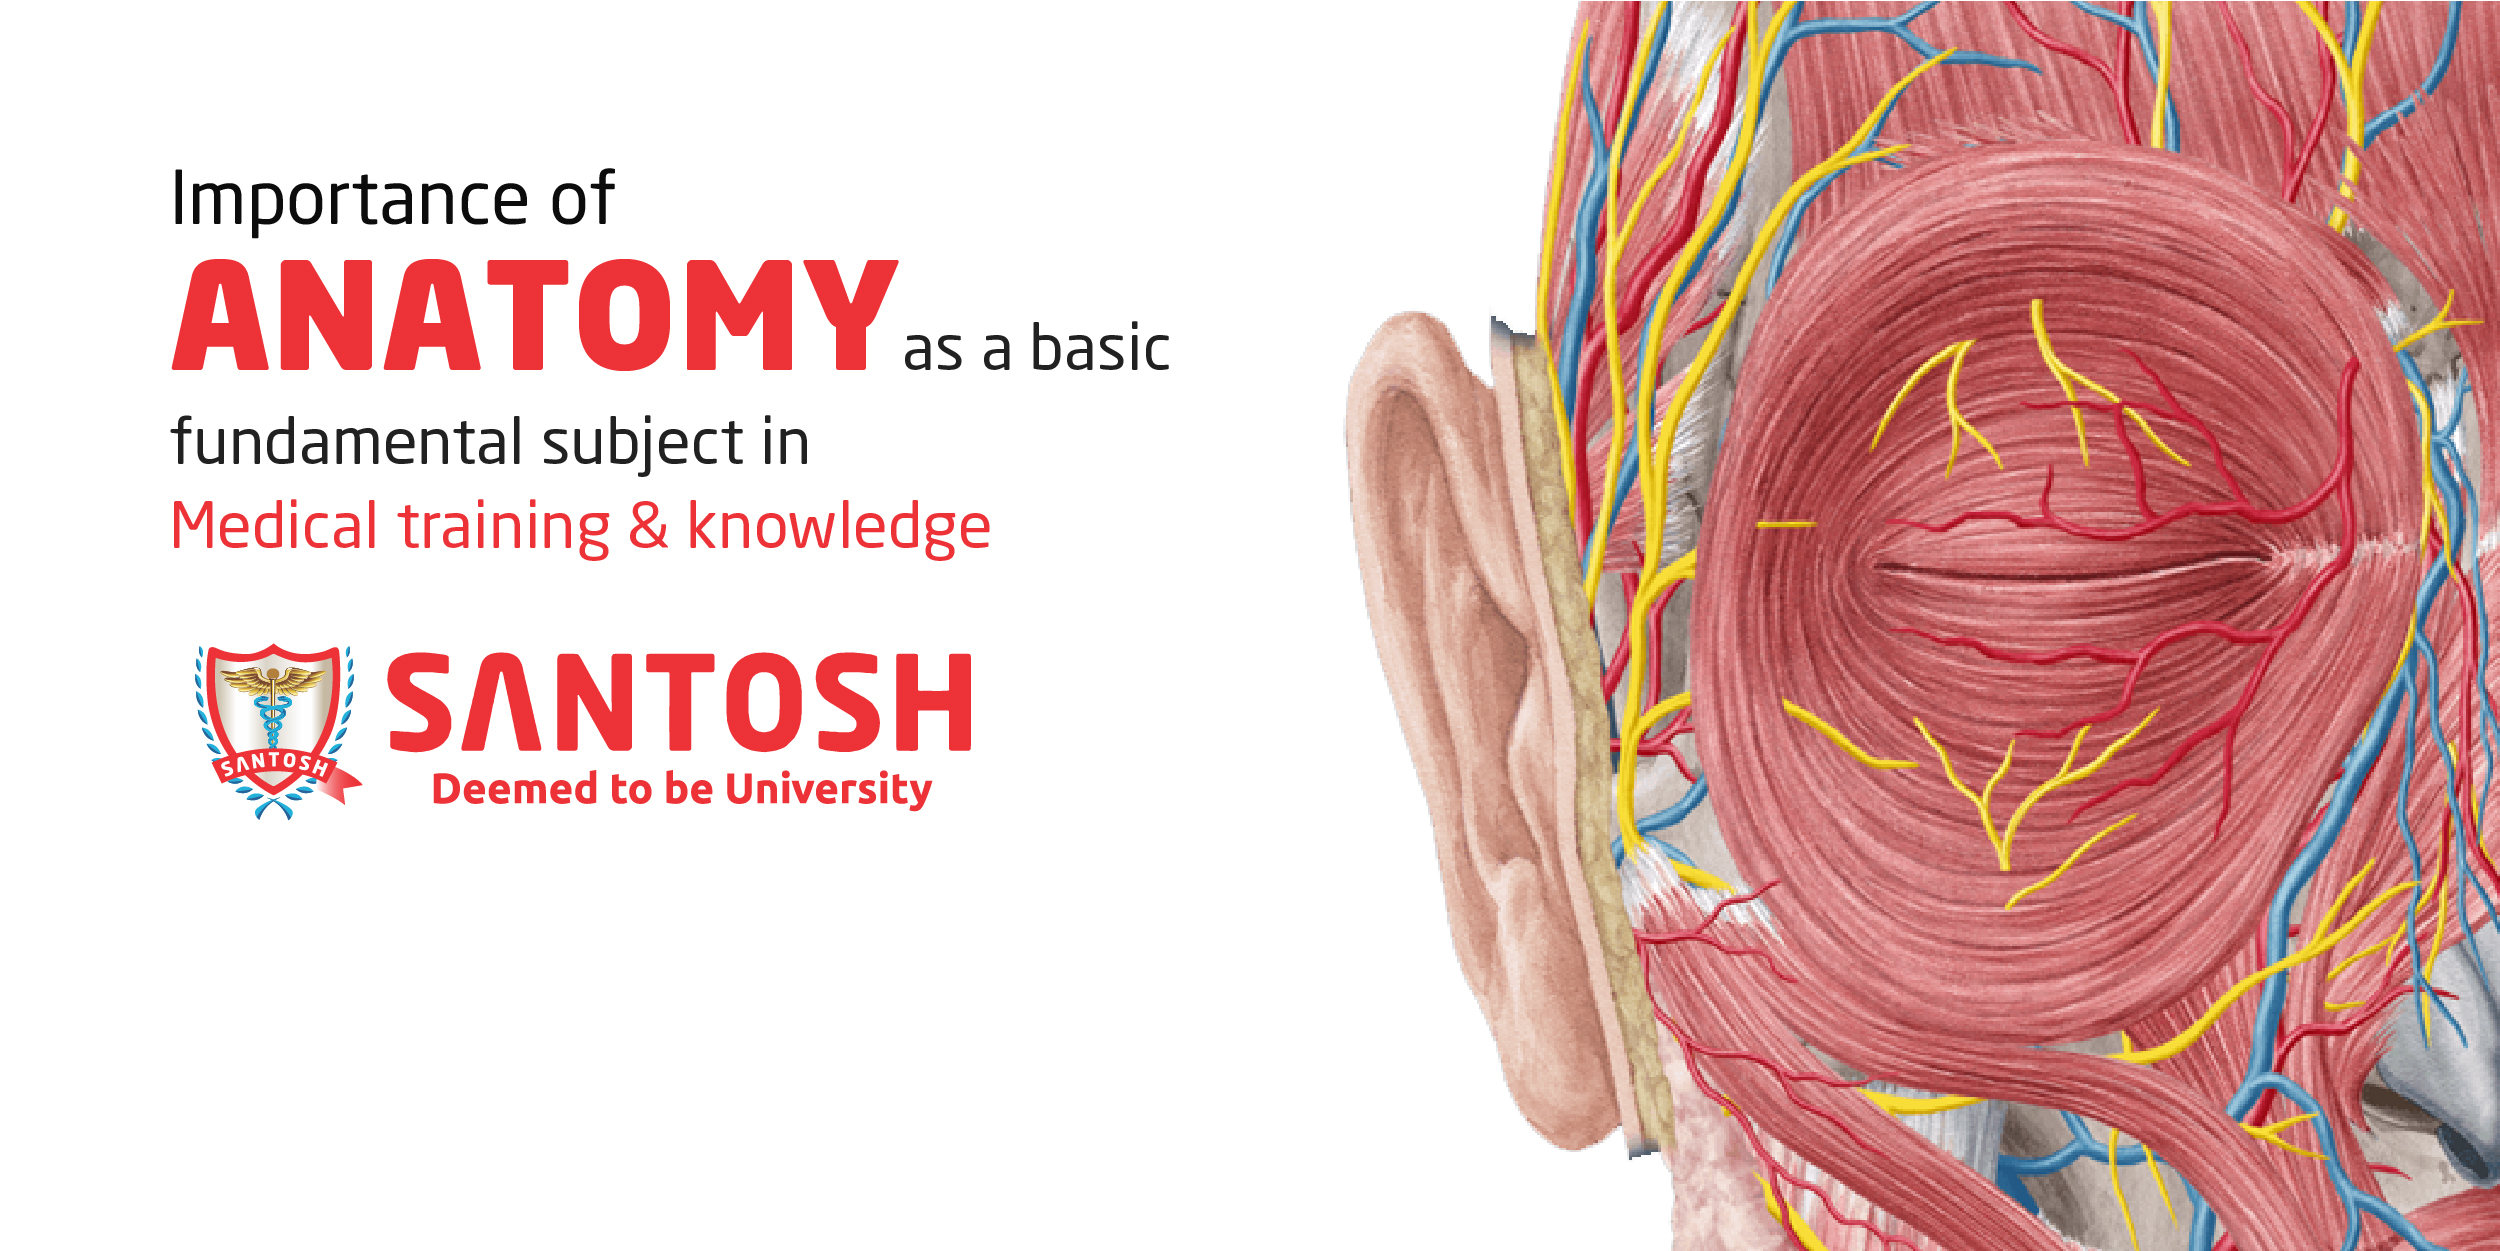 IMPORTANCE OF ANATOMY AS A BASIC FUNDAMENTAL SUBJECT IN MEDICAL